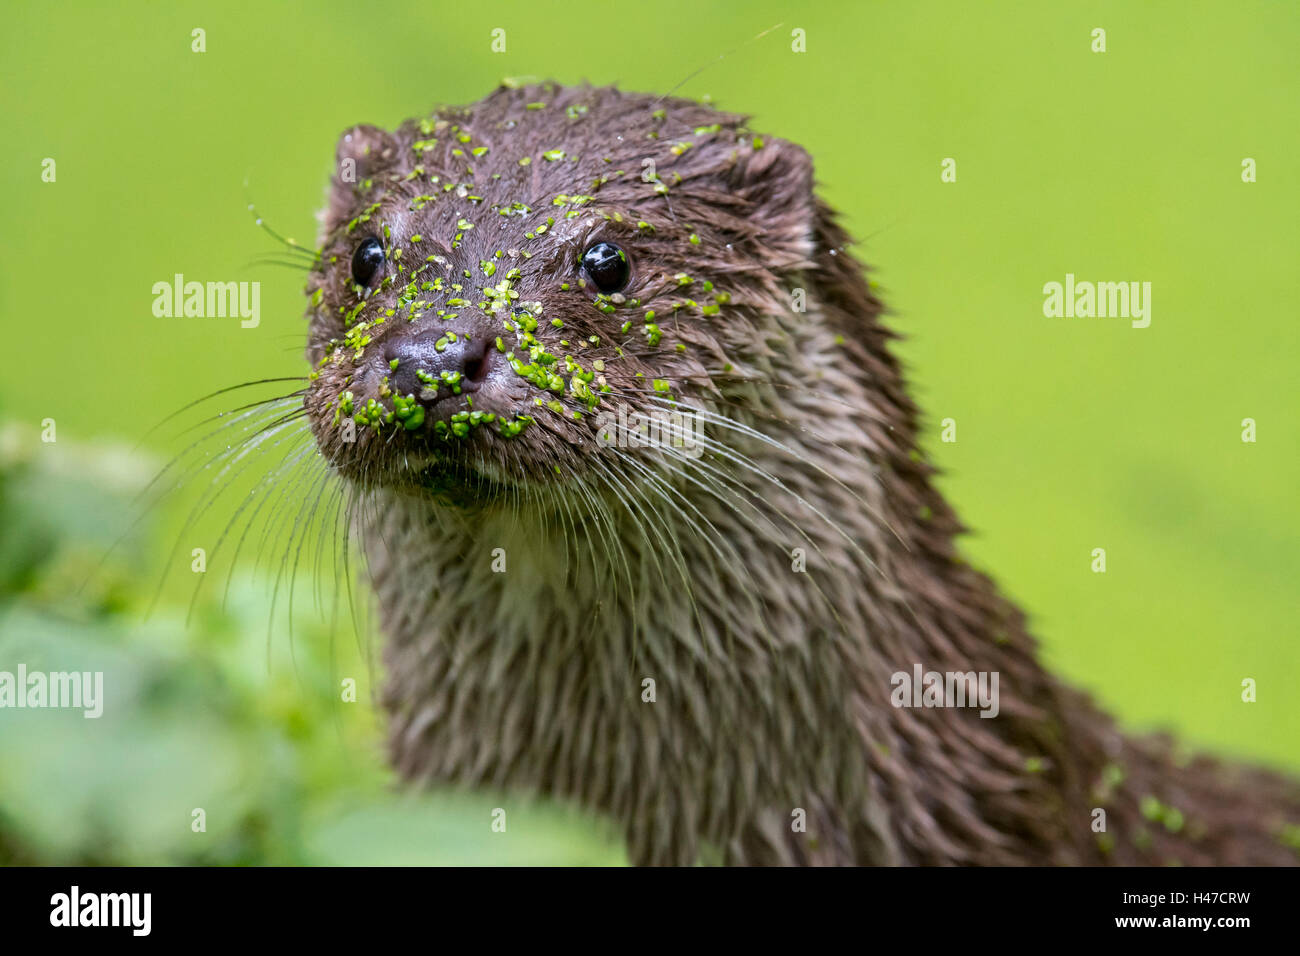 Close up portrait of European River Otter (Lutra lutra) in pond covered in duckweed Stock Photo